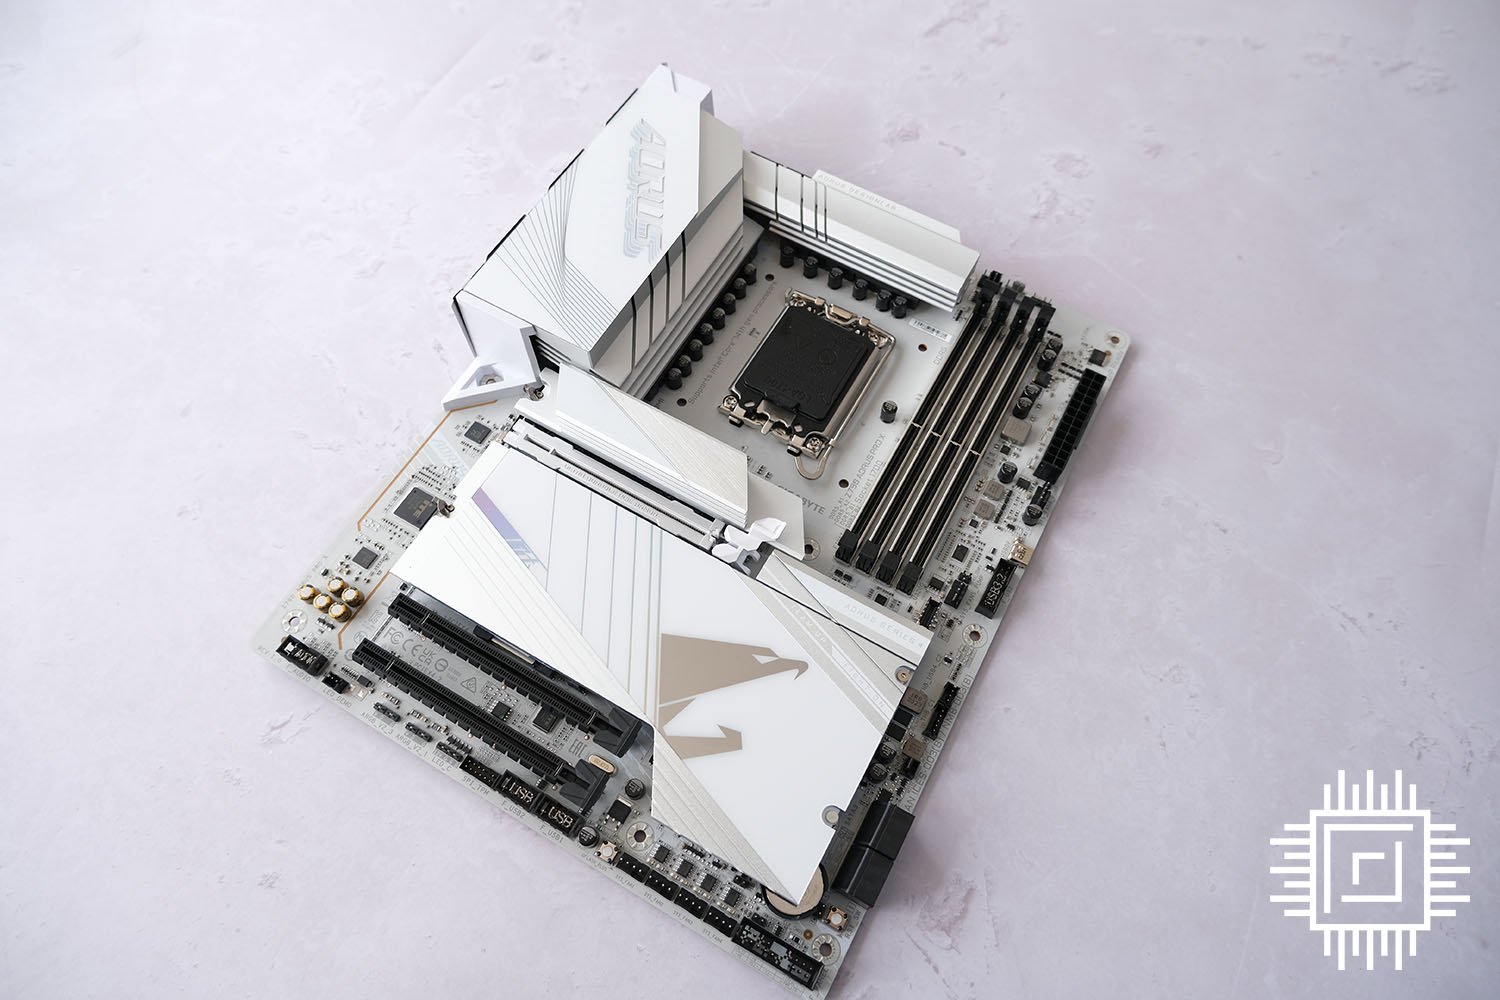 Gigabyte Z790 Aorus Pro X as seen from the top down.